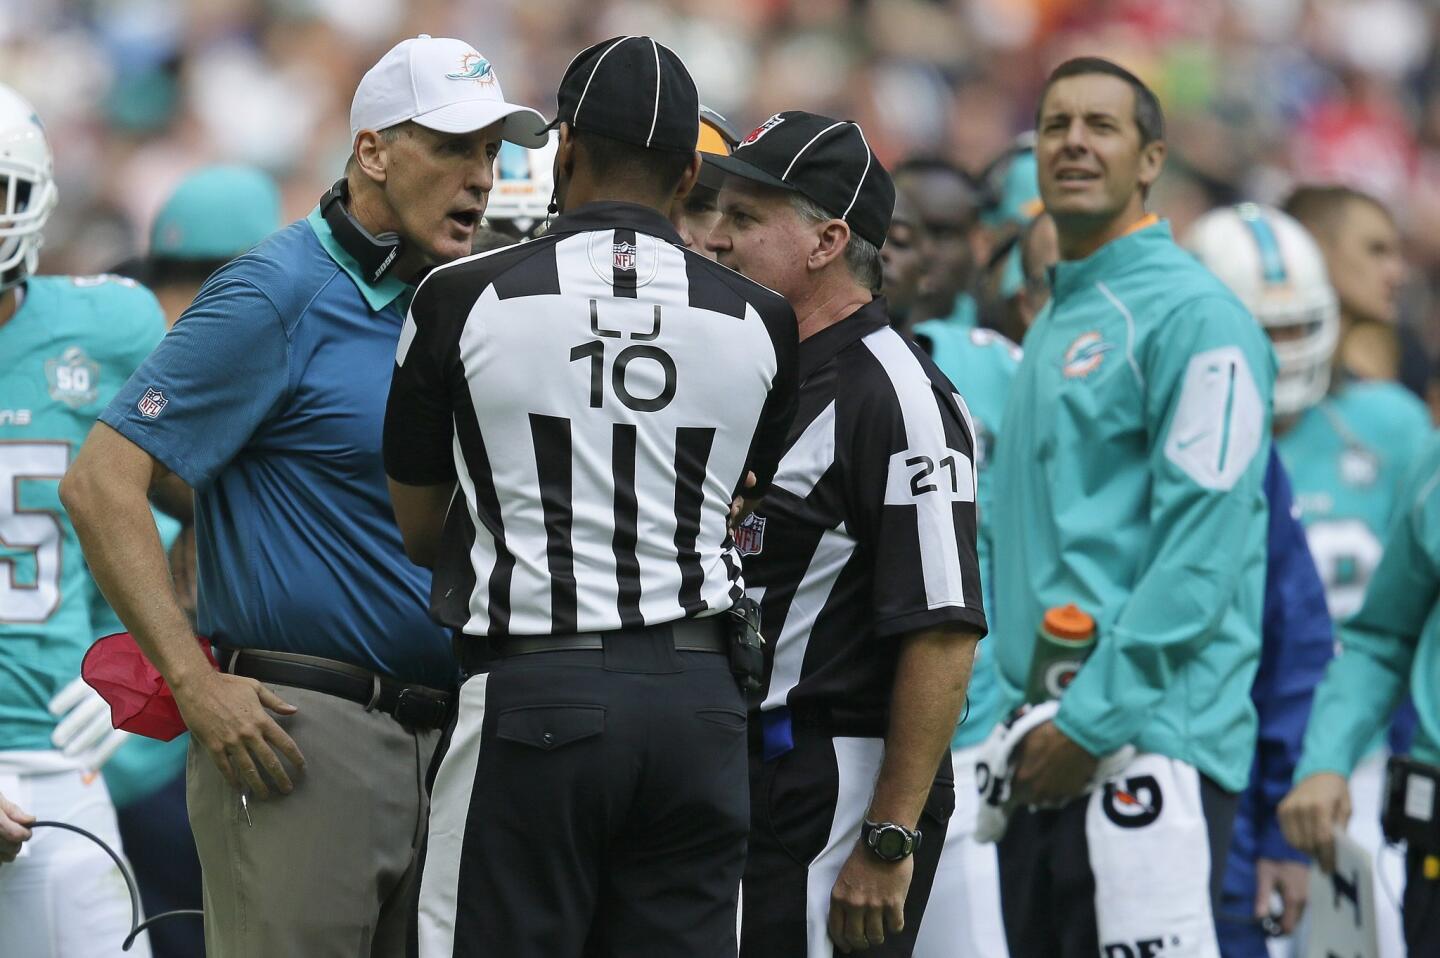 Miami Dolphins head coach Joe Philbin, left, speaks to officials during the NFL football game between the New York Jets and the Miami Dolphins and at Wembley stadium in London, Sunday, Oct. 4, 2015. (AP Photo/Tim Ireland) ORG XMIT: WEM141